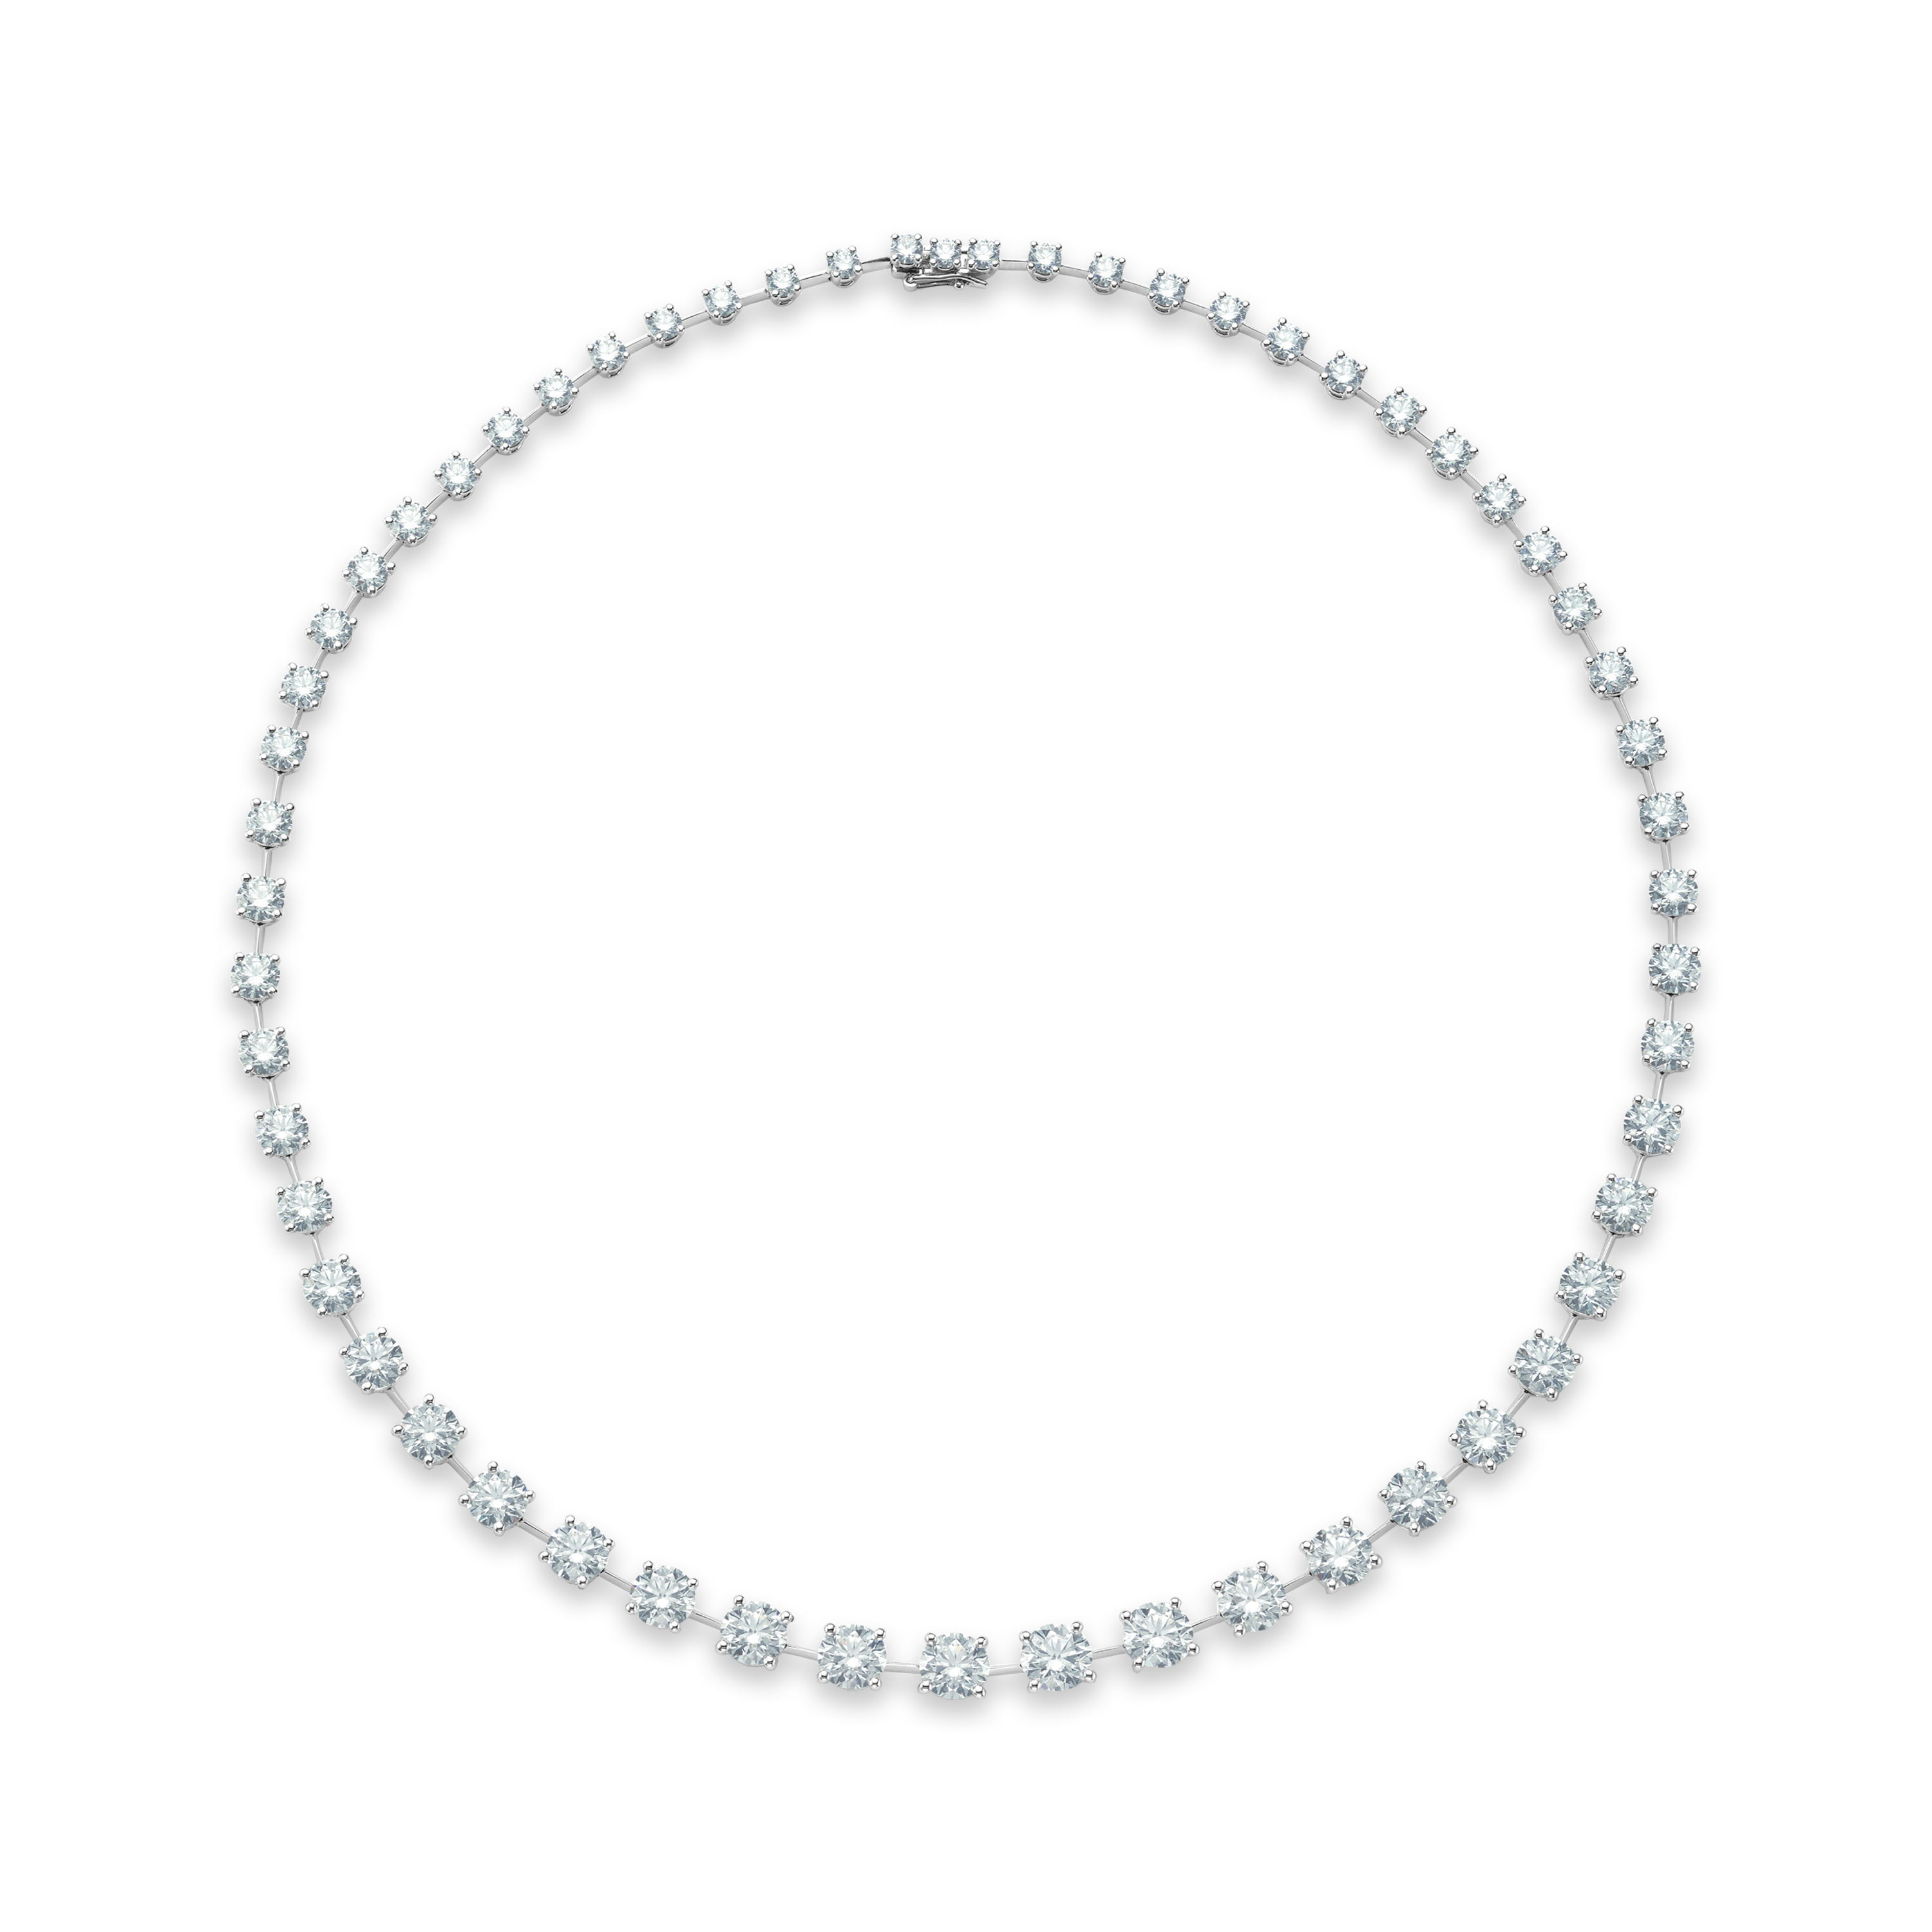 COLLIER DB CLASSIC DROPS OF LIGHT DIAMANTS TAILLE BRILLANT, image 1